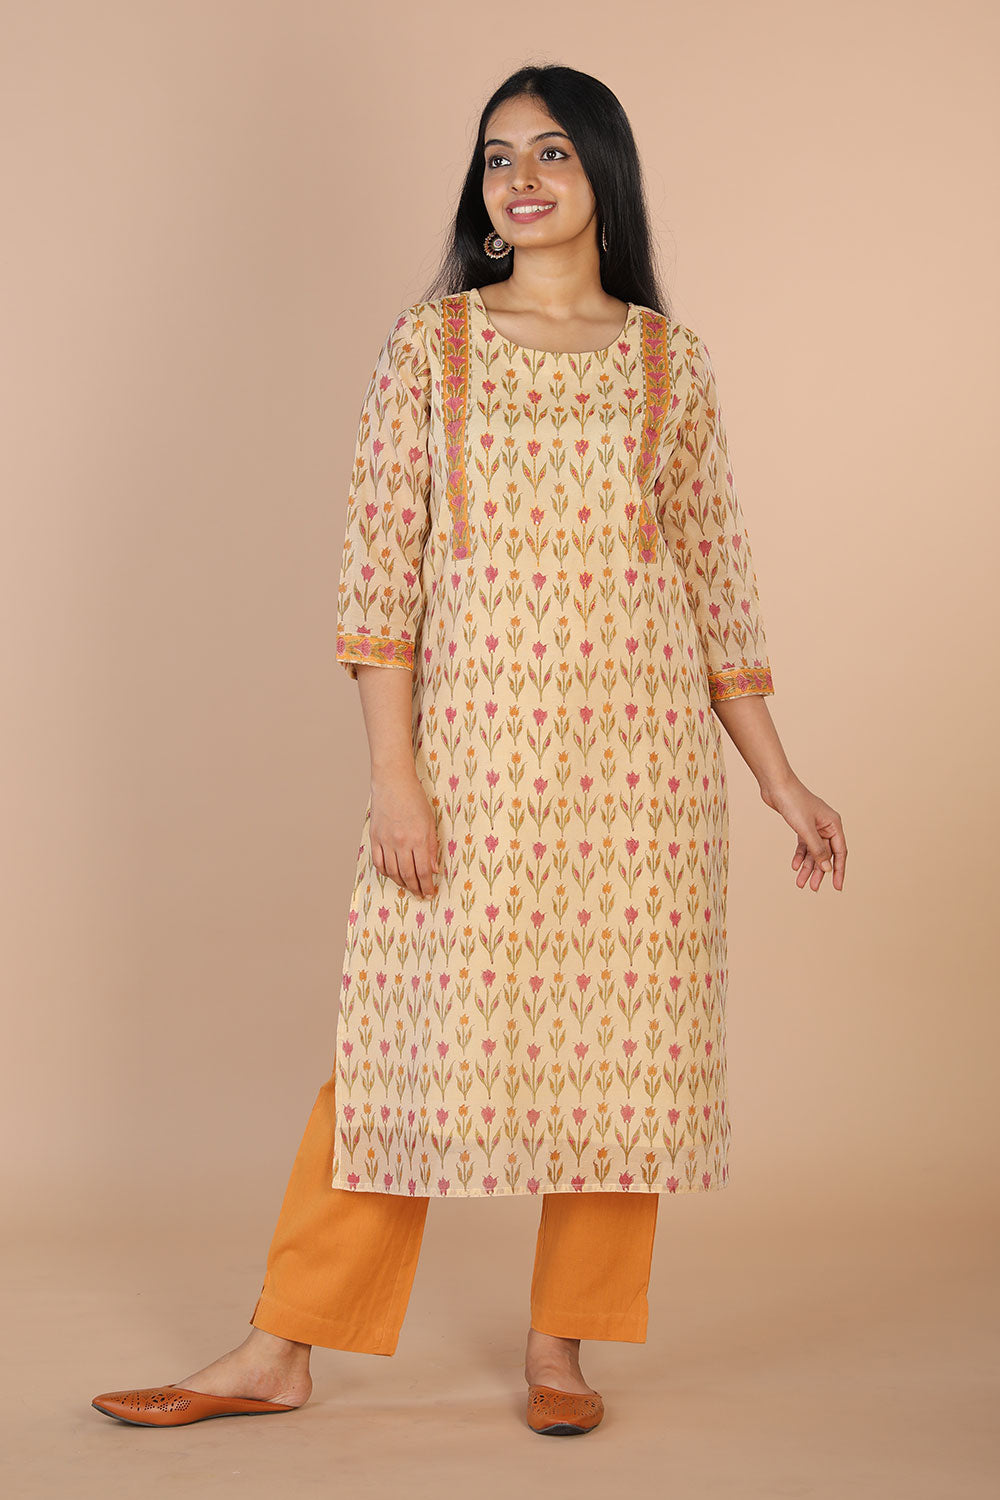 Hand block printed chanderi kurti with Kantha embroidery and border detailing.